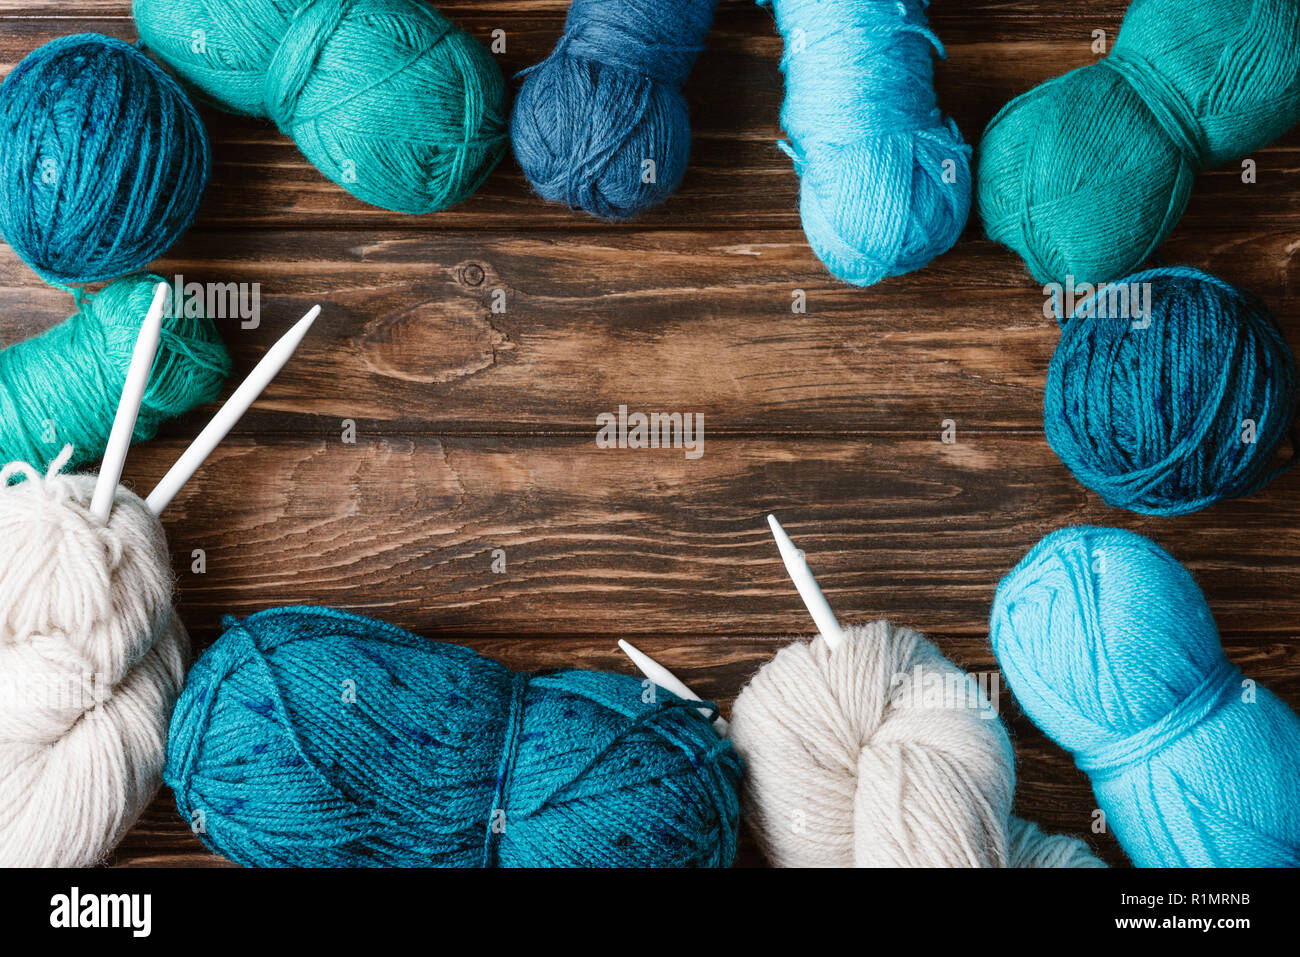 flat lay with arranged yarn clews and knitting needles on wooden surface Stock Photo